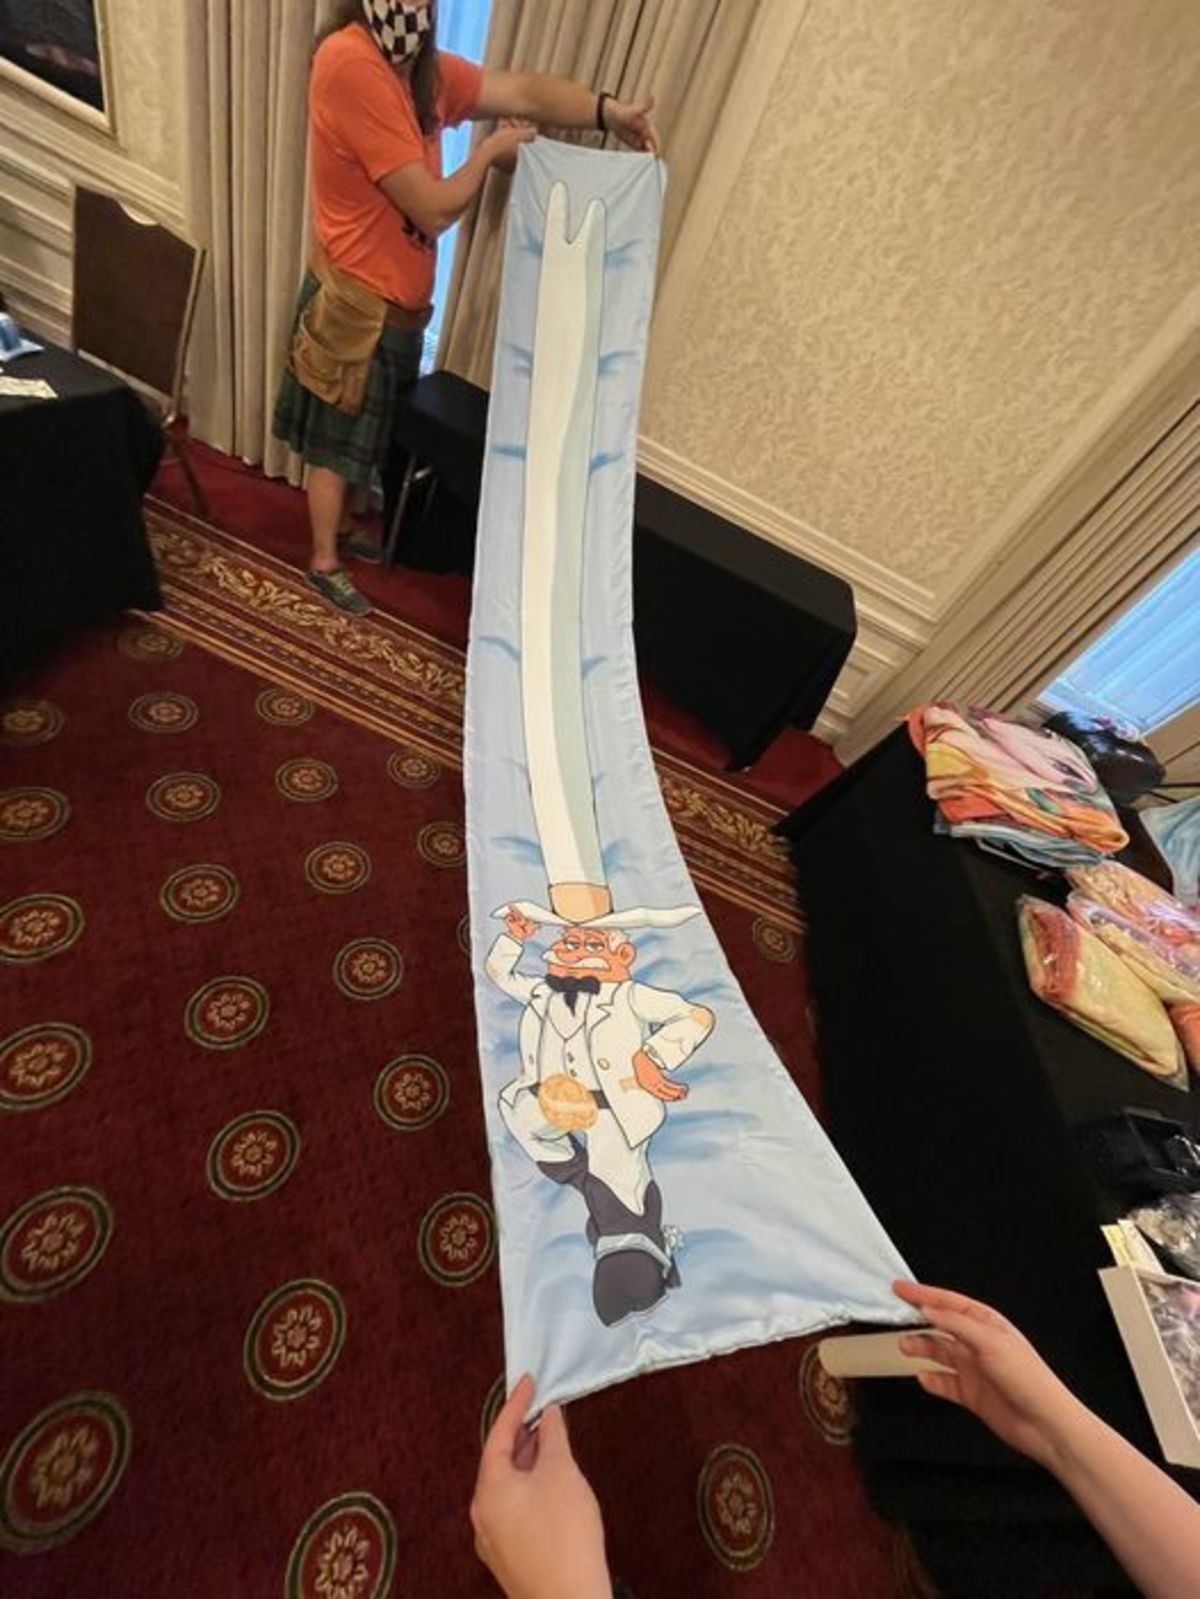 Dimma Dakimakura. .. This will probably get deleted, but had to make it for the sake of the meme.